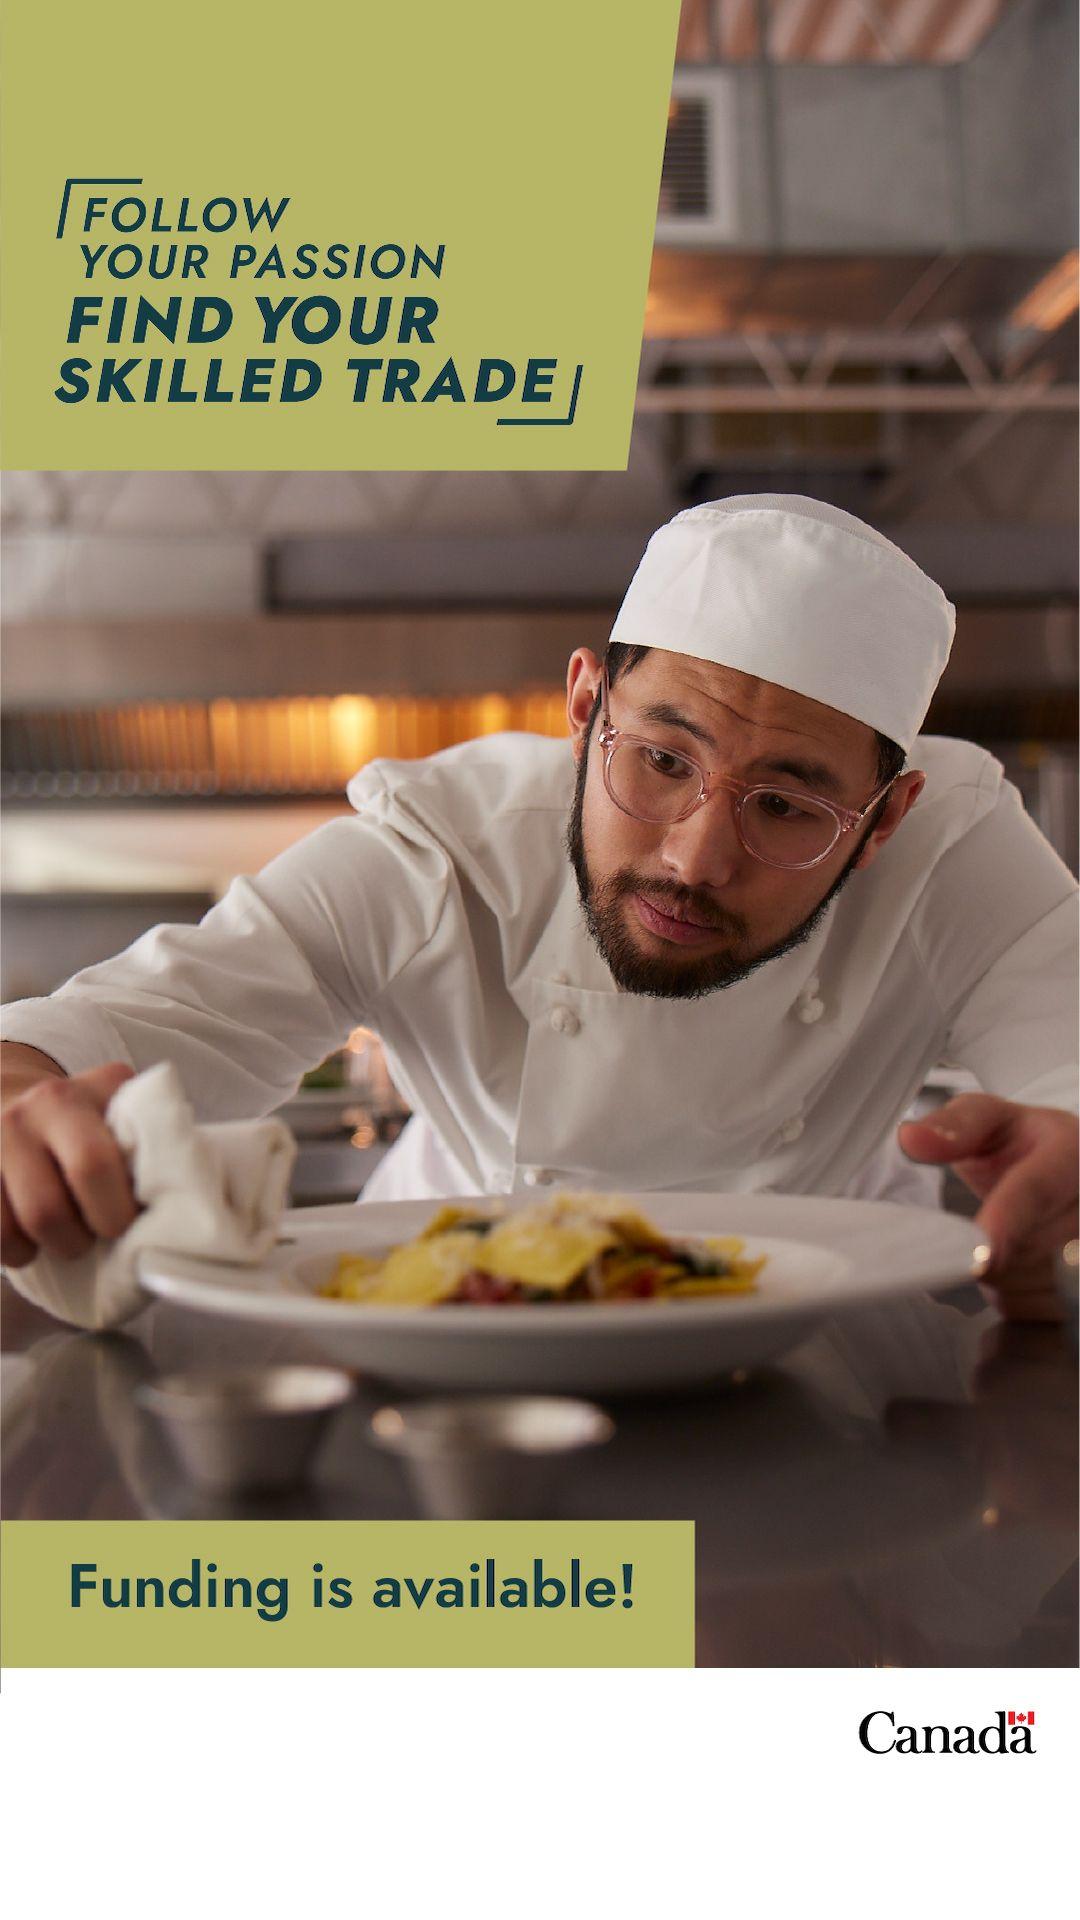 Poster example - Follow your passion, showing a chef